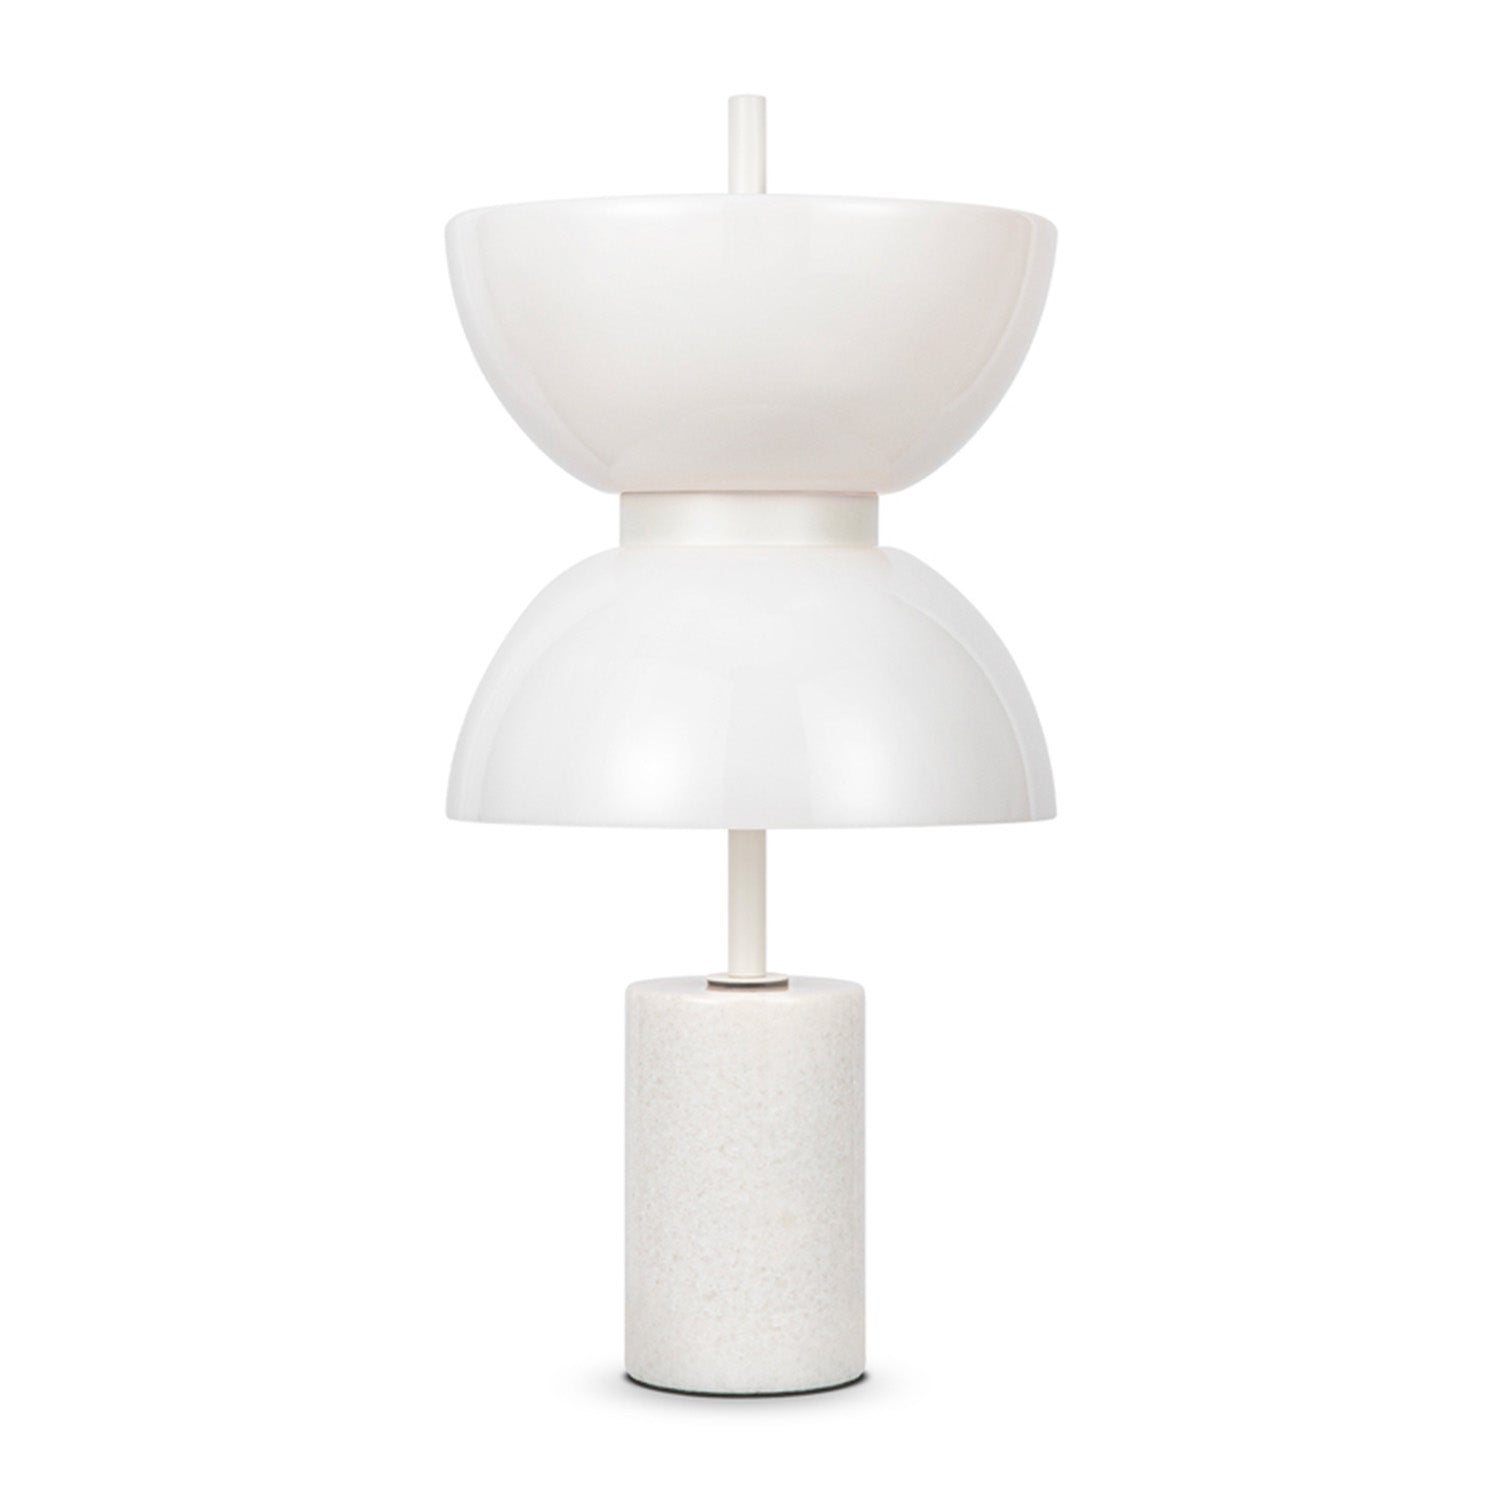 KYOTO - Marble and glass design table lamp